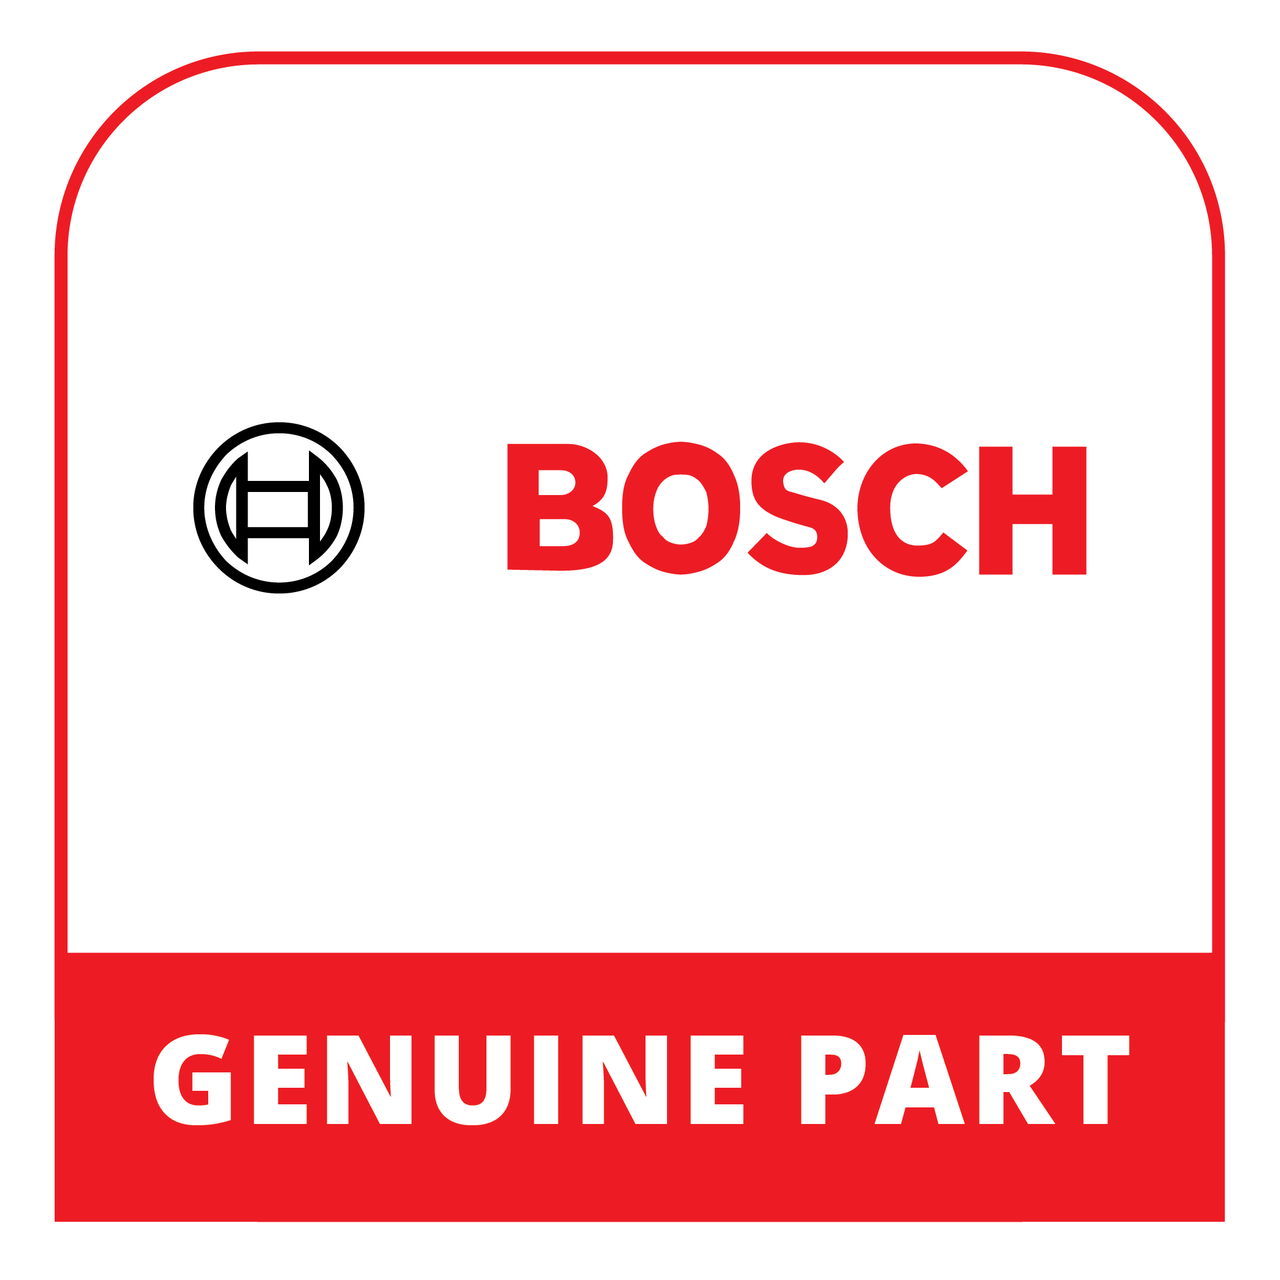 Bosch (Thermador) 11032983 - Gas Tap - Genuine Bosch (Thermador) Part